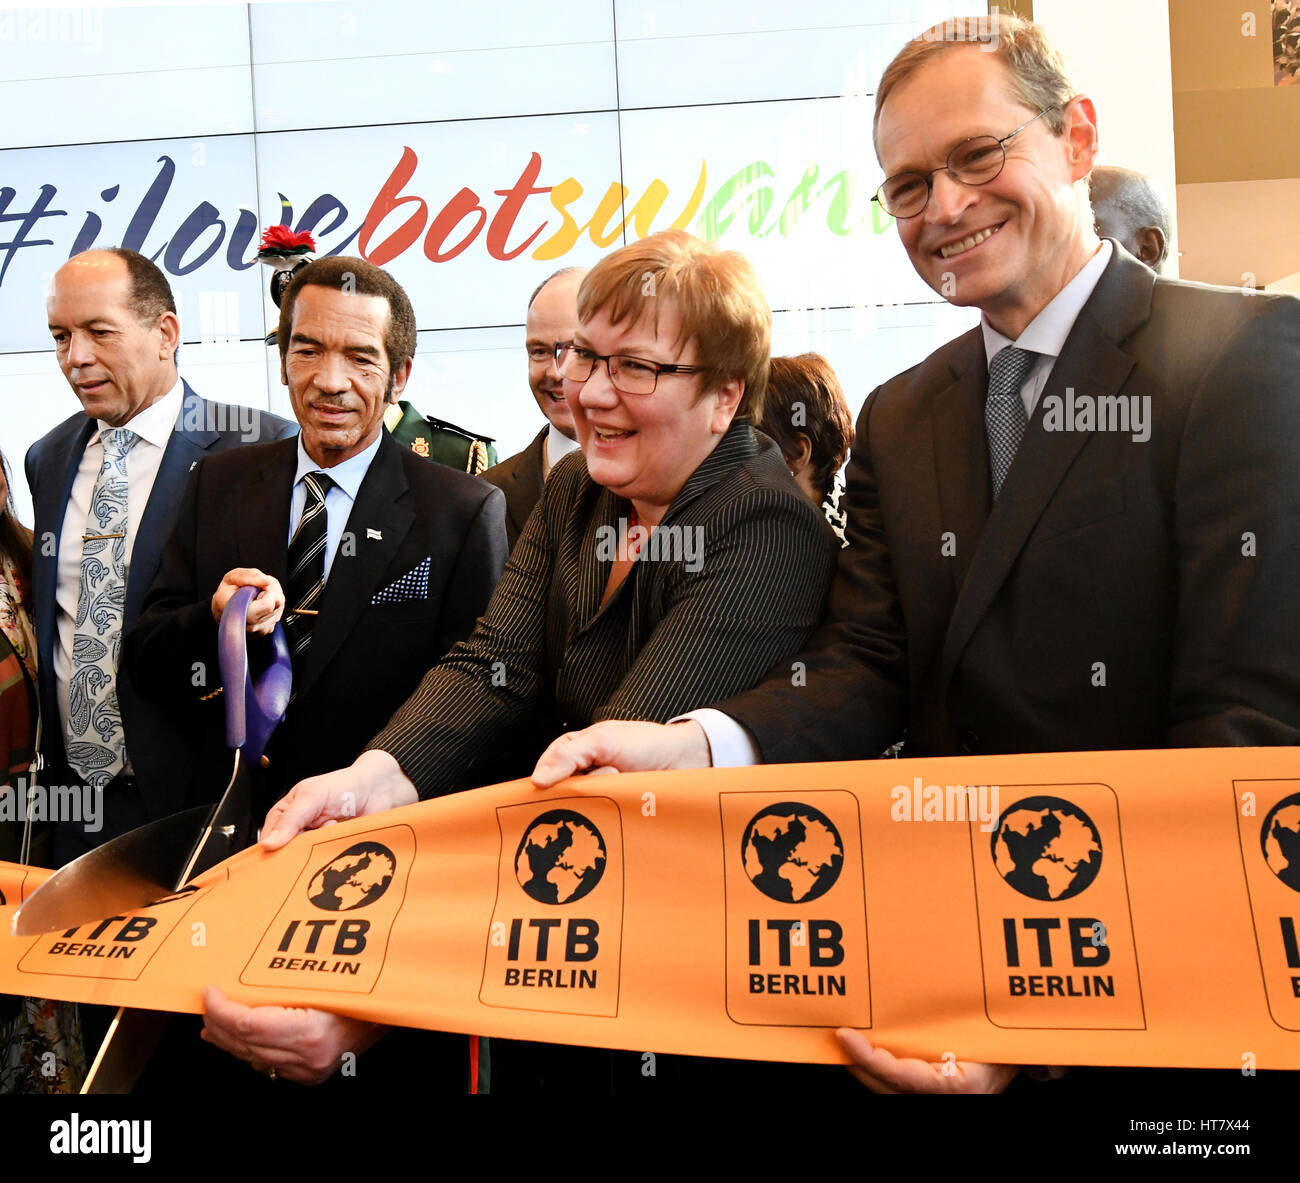 Berlin, Germany. 08th Mar, 2017. The Botswanan president Seretse Khama Ian Khama (2-L), the parliamentary secreatary of state Iris Gleicke and the mayor of Berlin Michael Mueller officially open the International Travel Trade Fair (ITB) in Berlin, Germany, 08 March 2017. The show is open between the 08.03.17 and the 12.03.17. This year's partner country is Botswana. Photo: Rainer Jensen/dpa/Alamy Live News Stock Photo